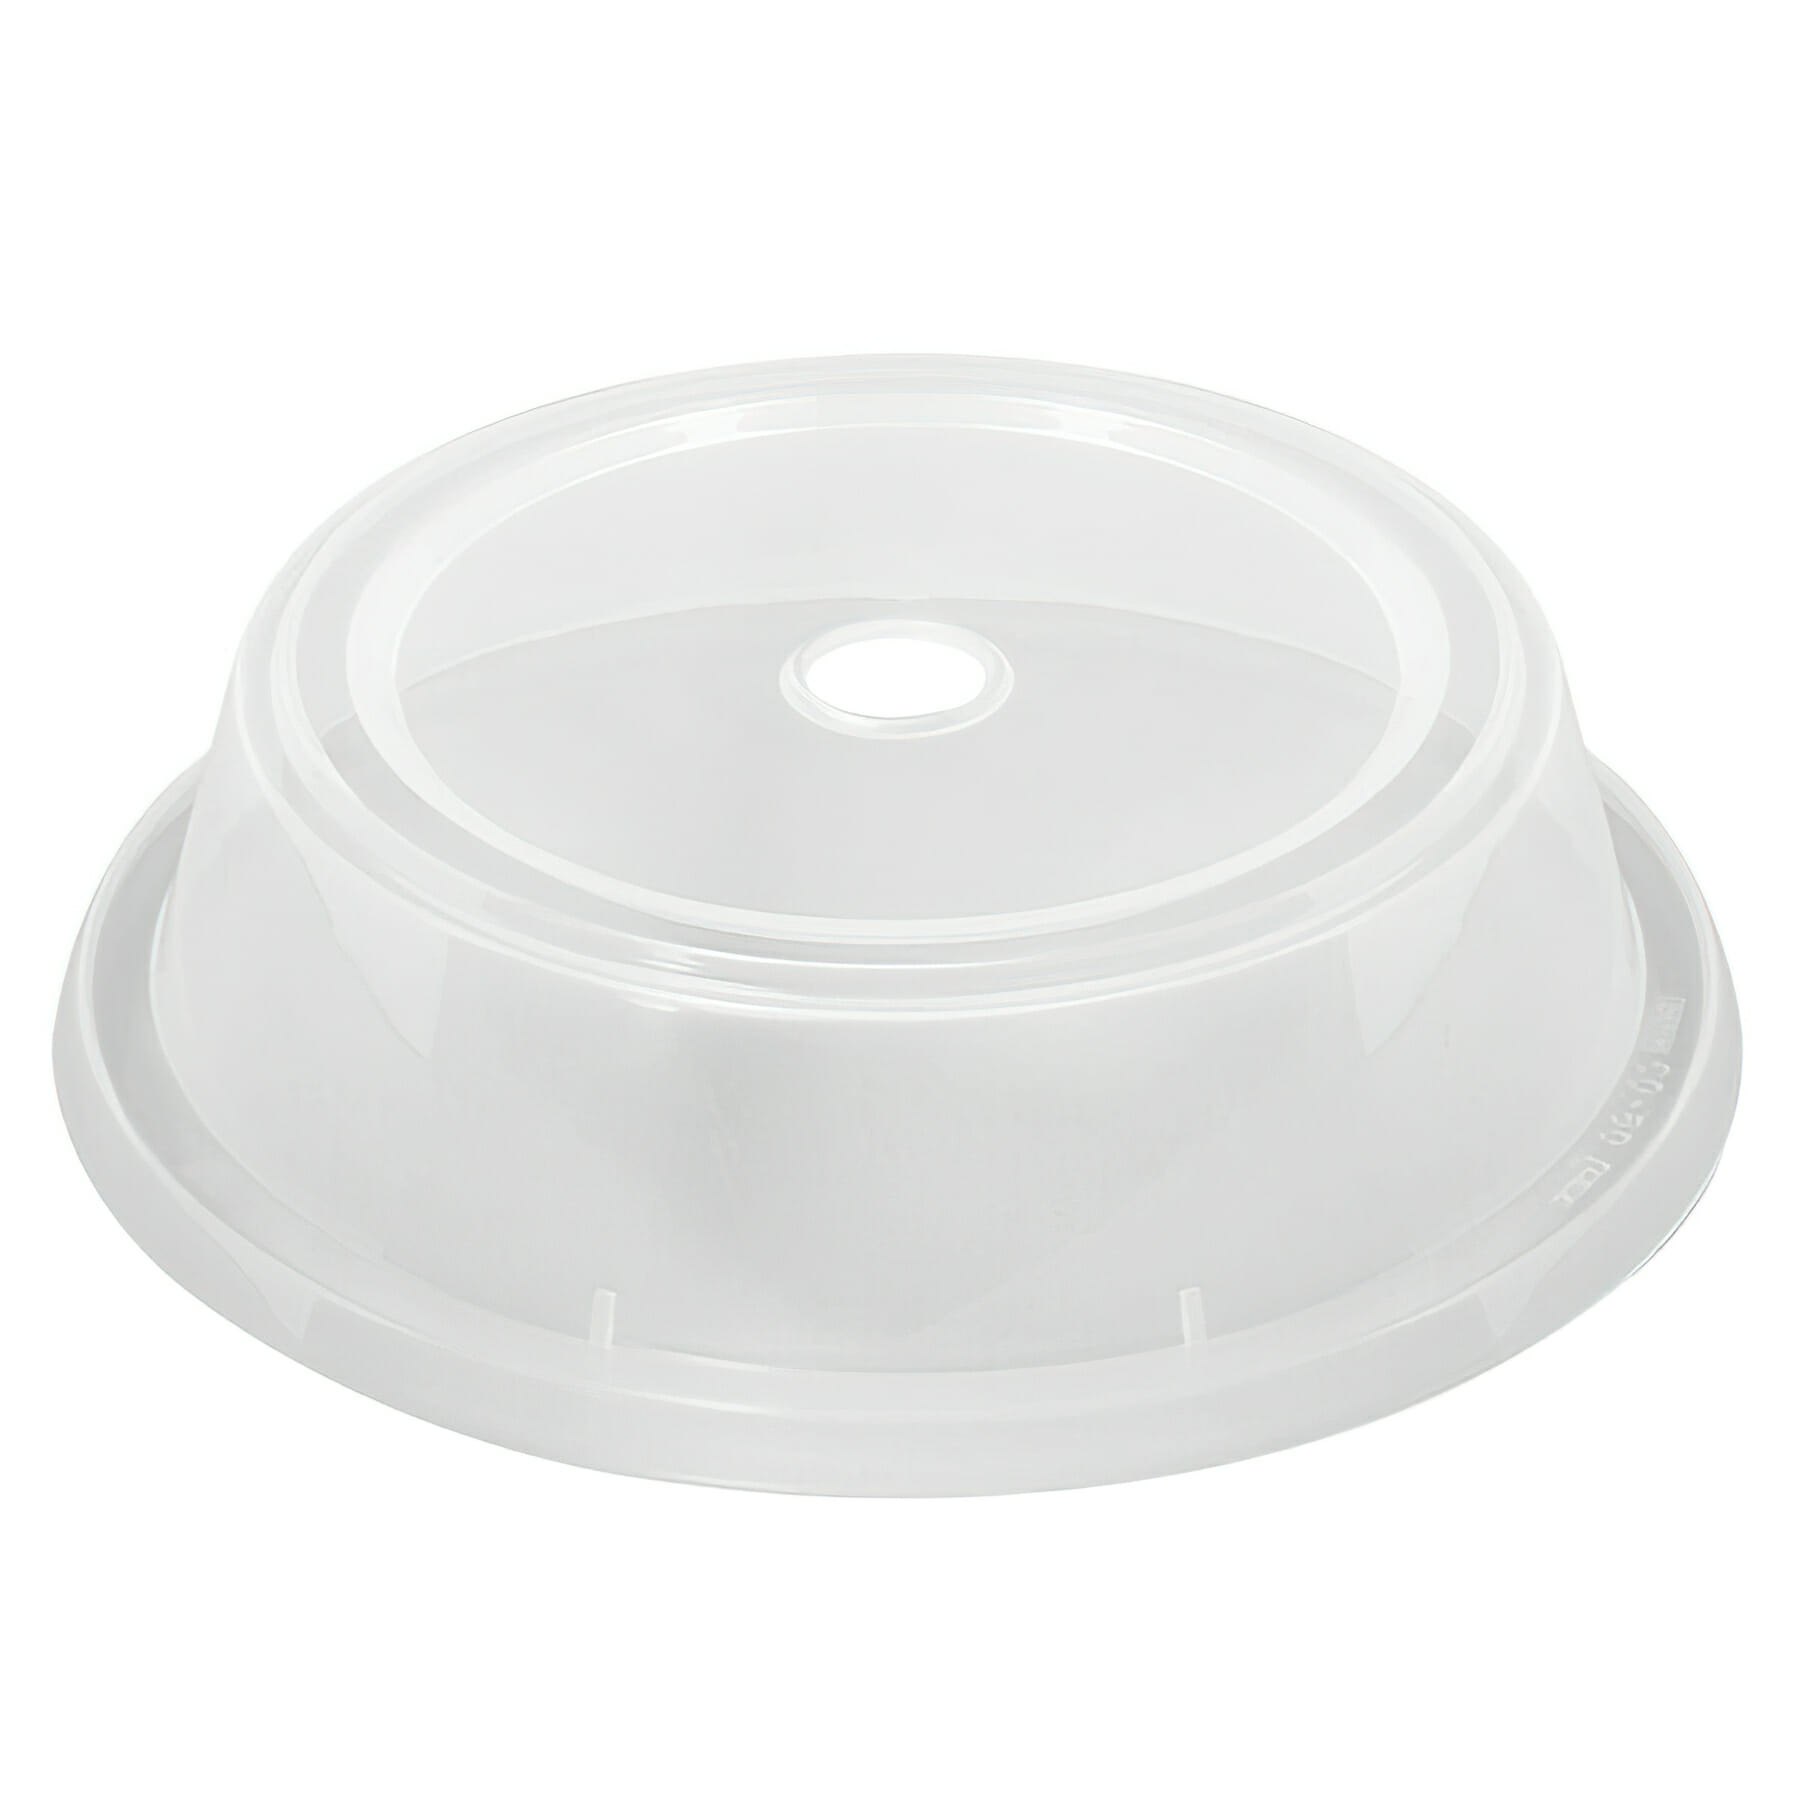 Plate Cover for CP-530, P-1530 or 8.25" - 9" Round Plate (Top Insert Dia. 5.5")